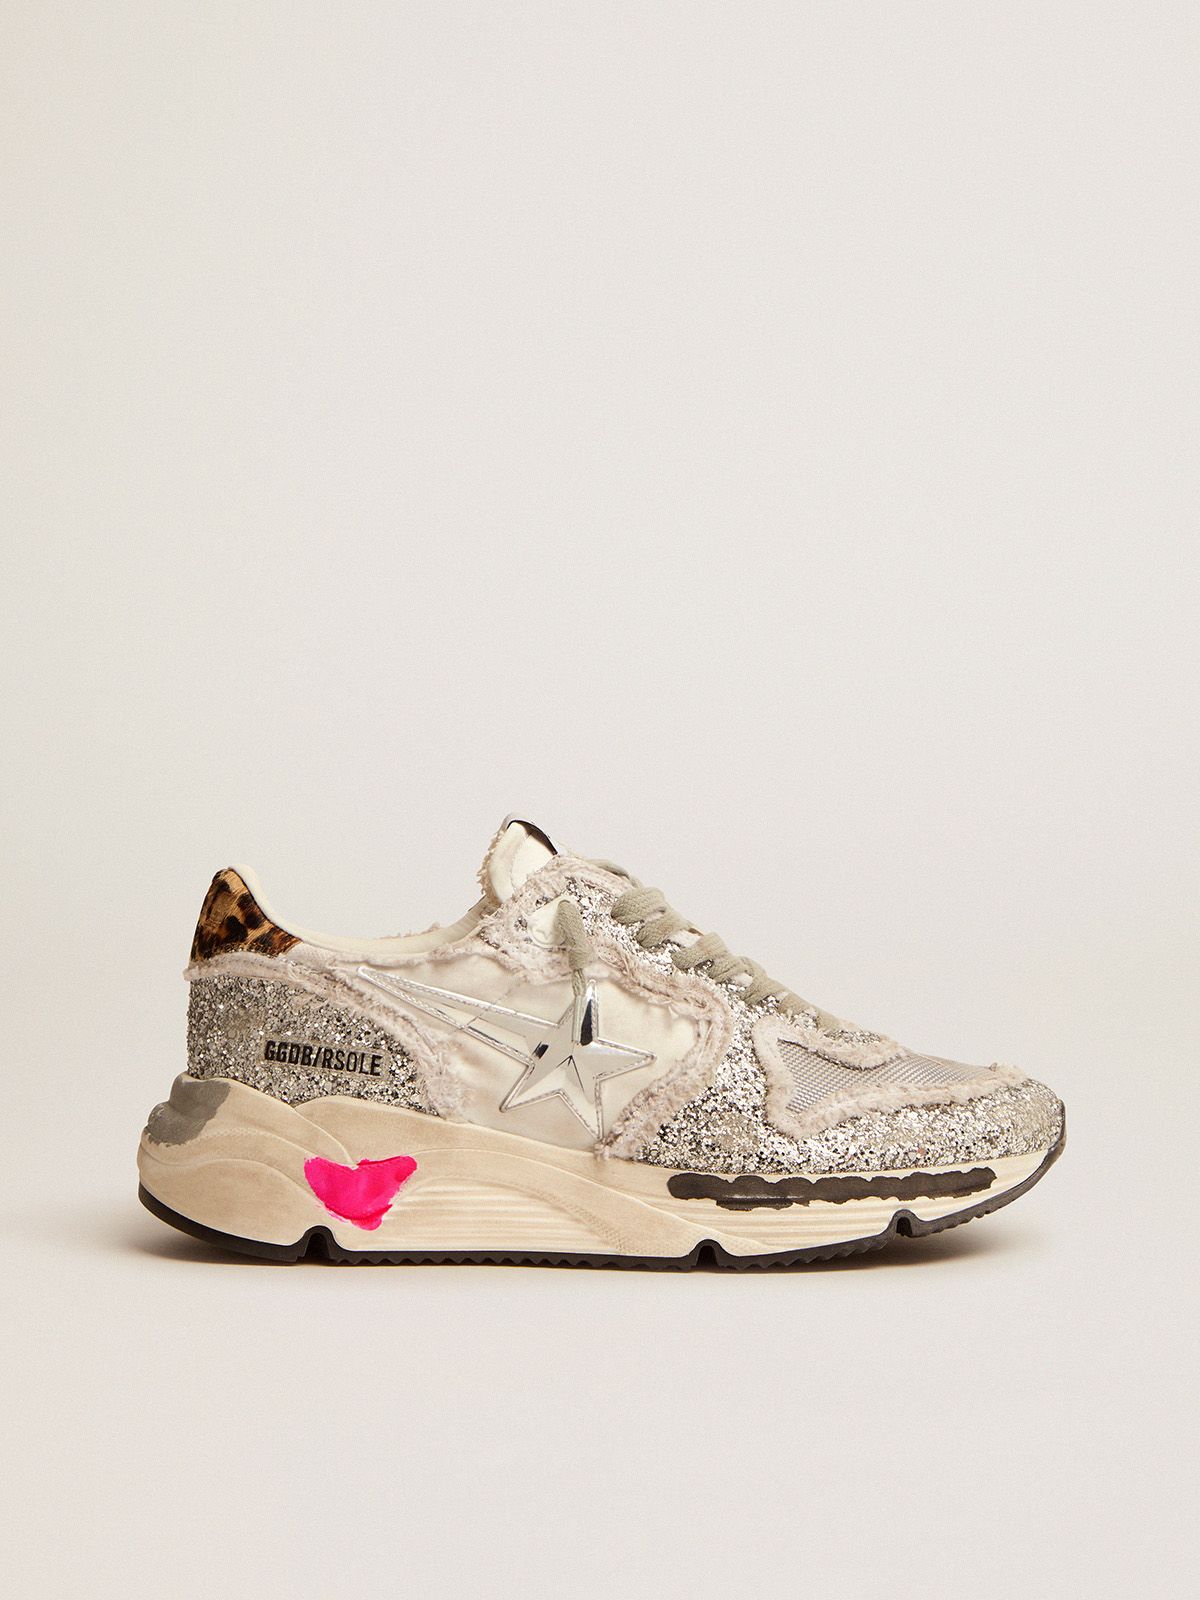 golden goose sneakers tab glitter nylon silver in Running and skin Sole with pony heel leopard-print